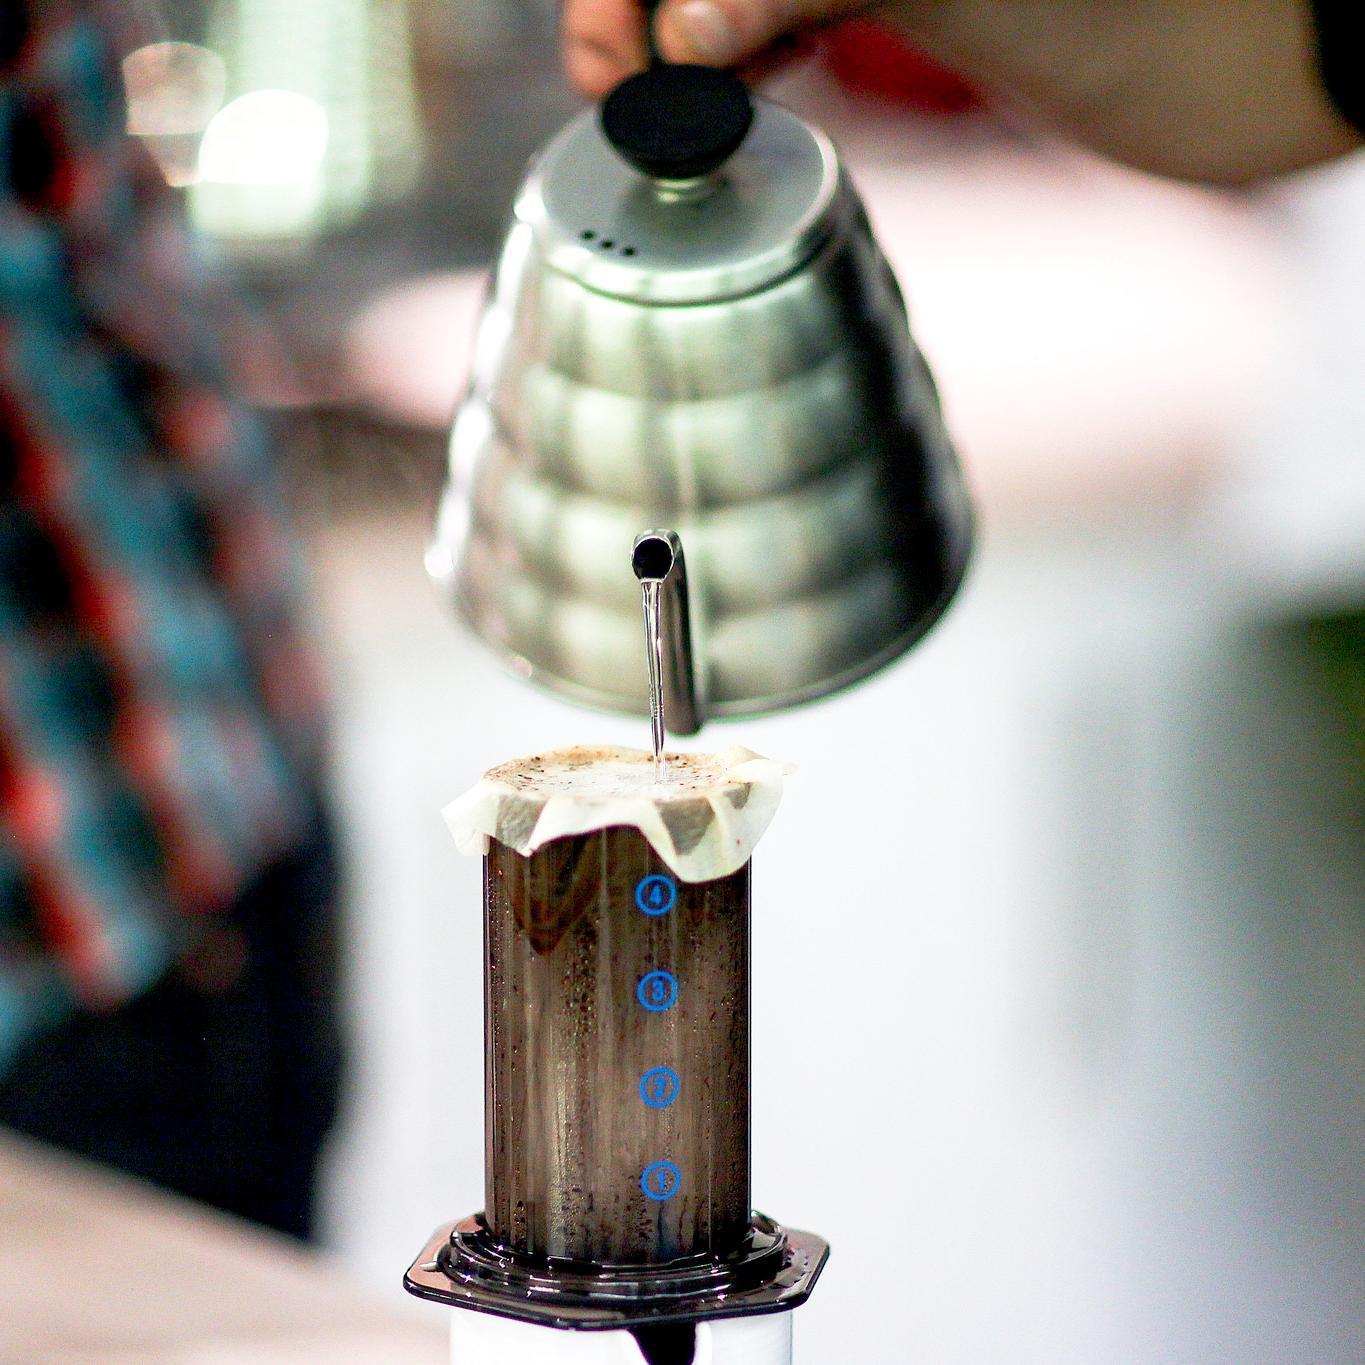 Learn how to make the perfect #coffee. The world's best Aeropress recipes, collected in one place.